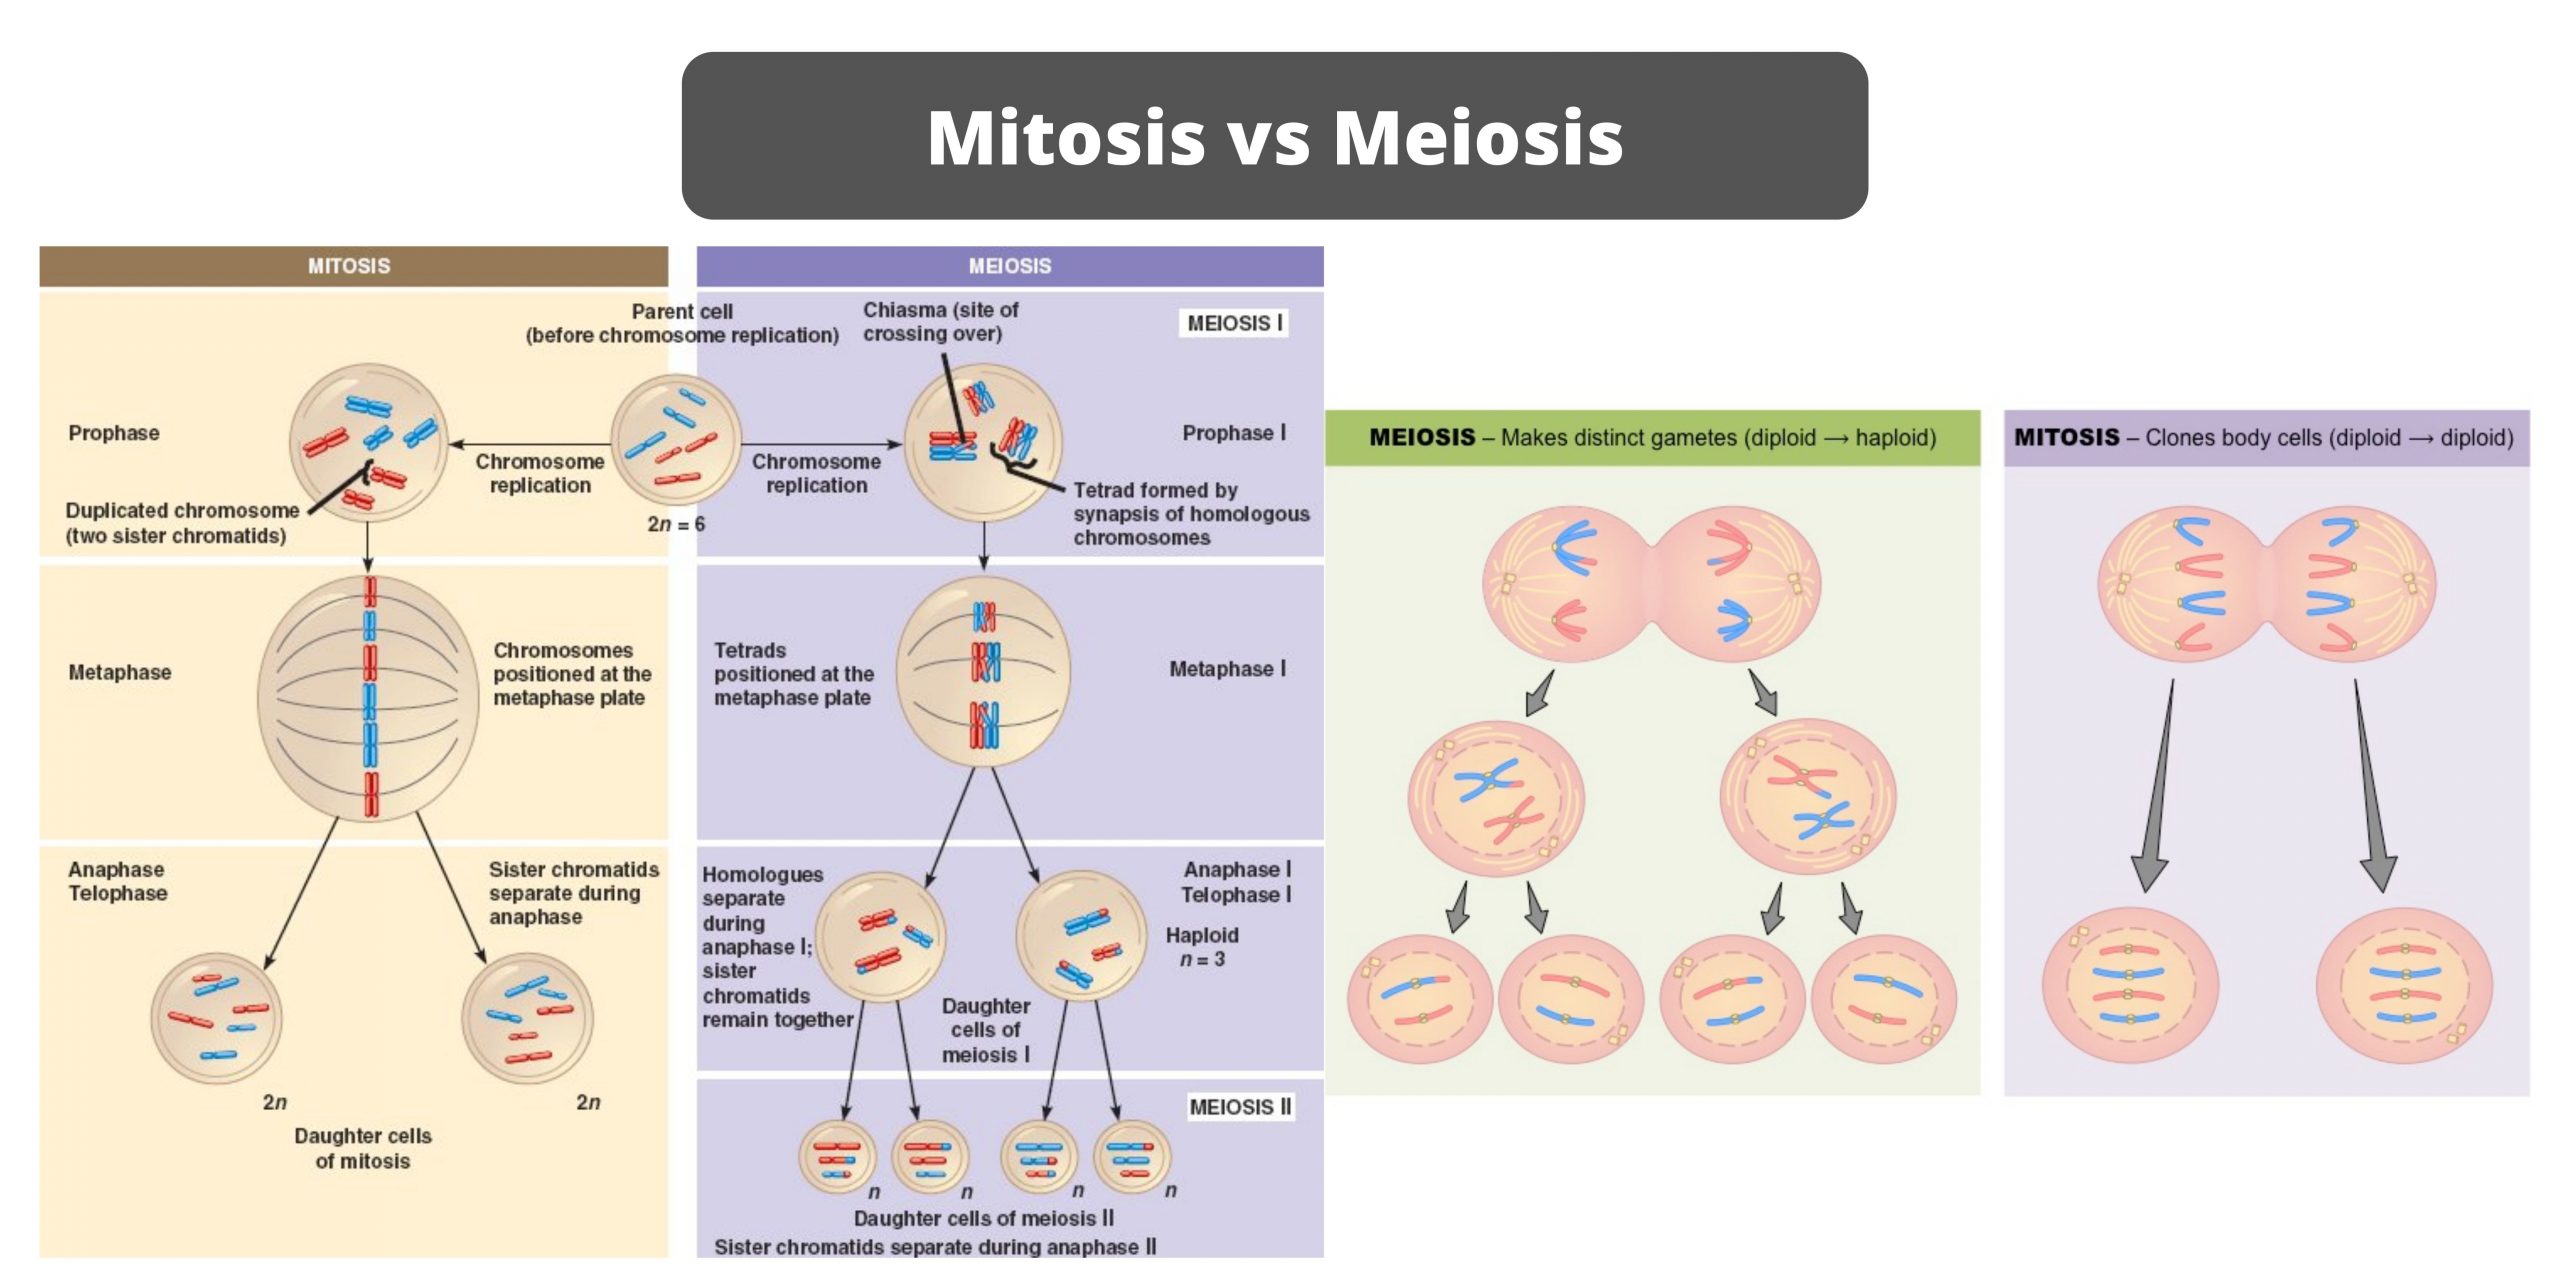 Differences between Mitosis and Meiosis - Mitosis vs Meiosis.